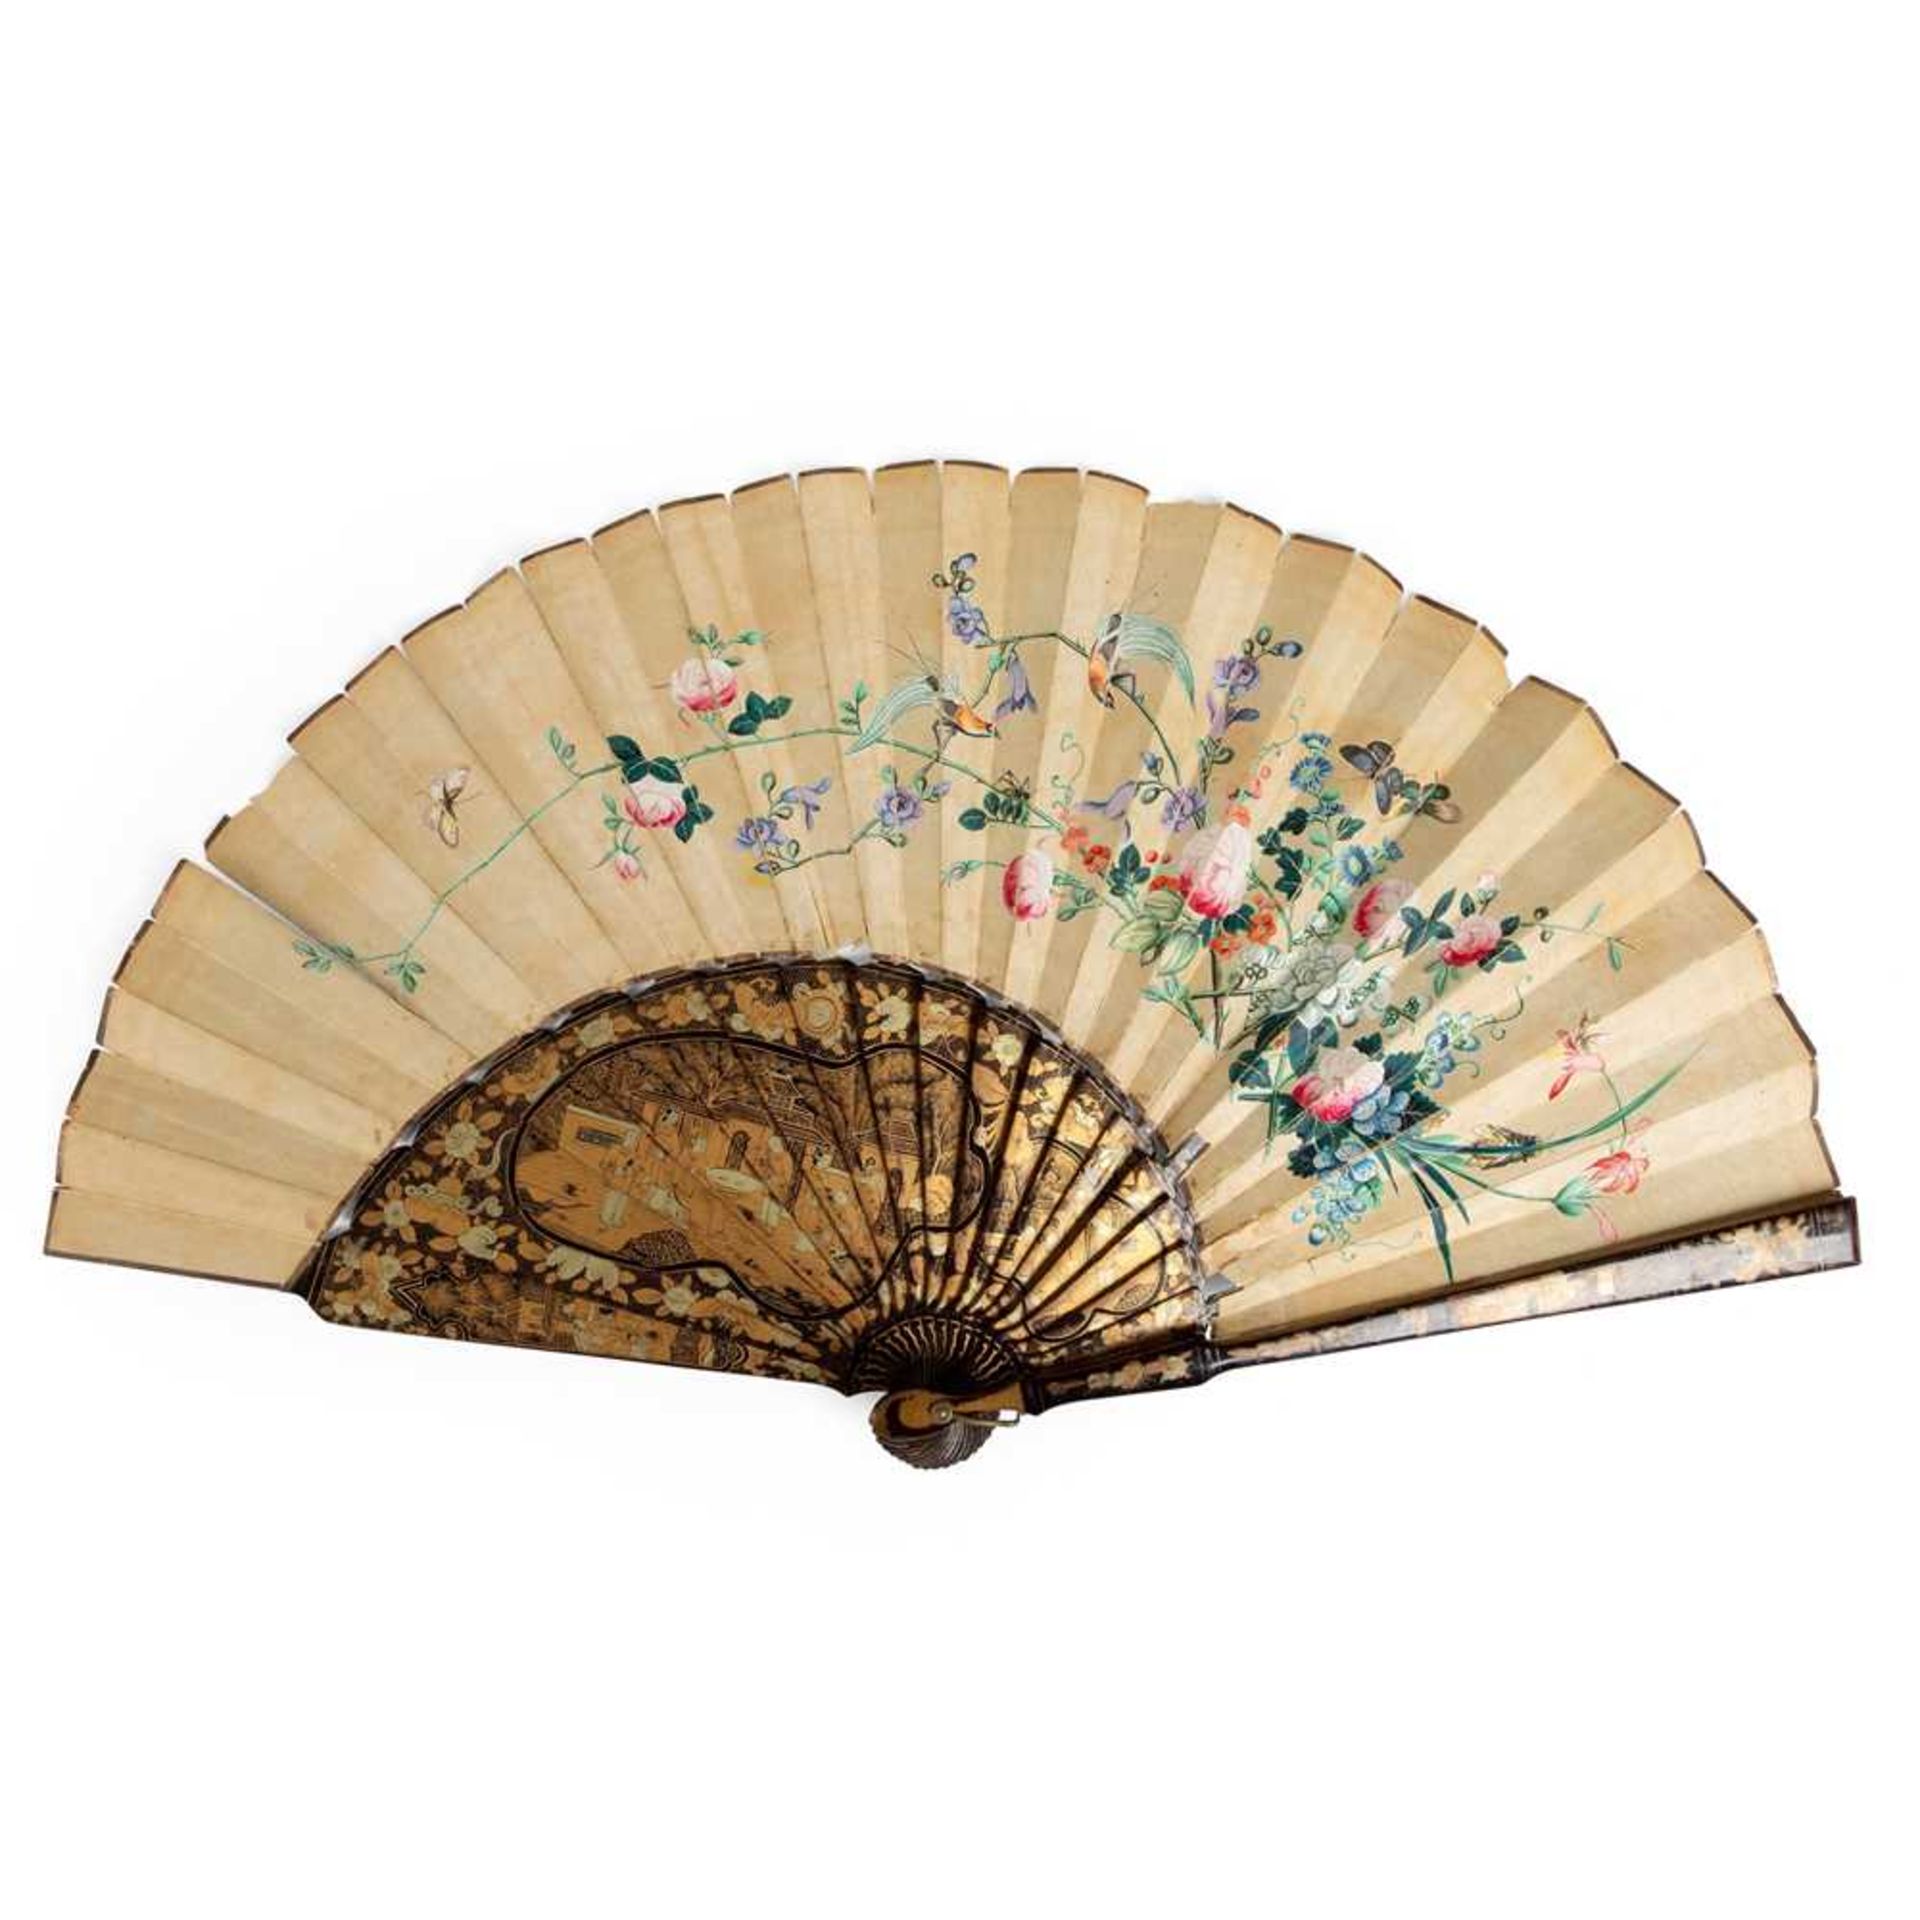 CANTON LACQUERED AND PAPER 'BIRDS AND FLOWERS' ARTICULATED FAN QING DYNASTY, MID-19TH CENTURY - Bild 2 aus 2